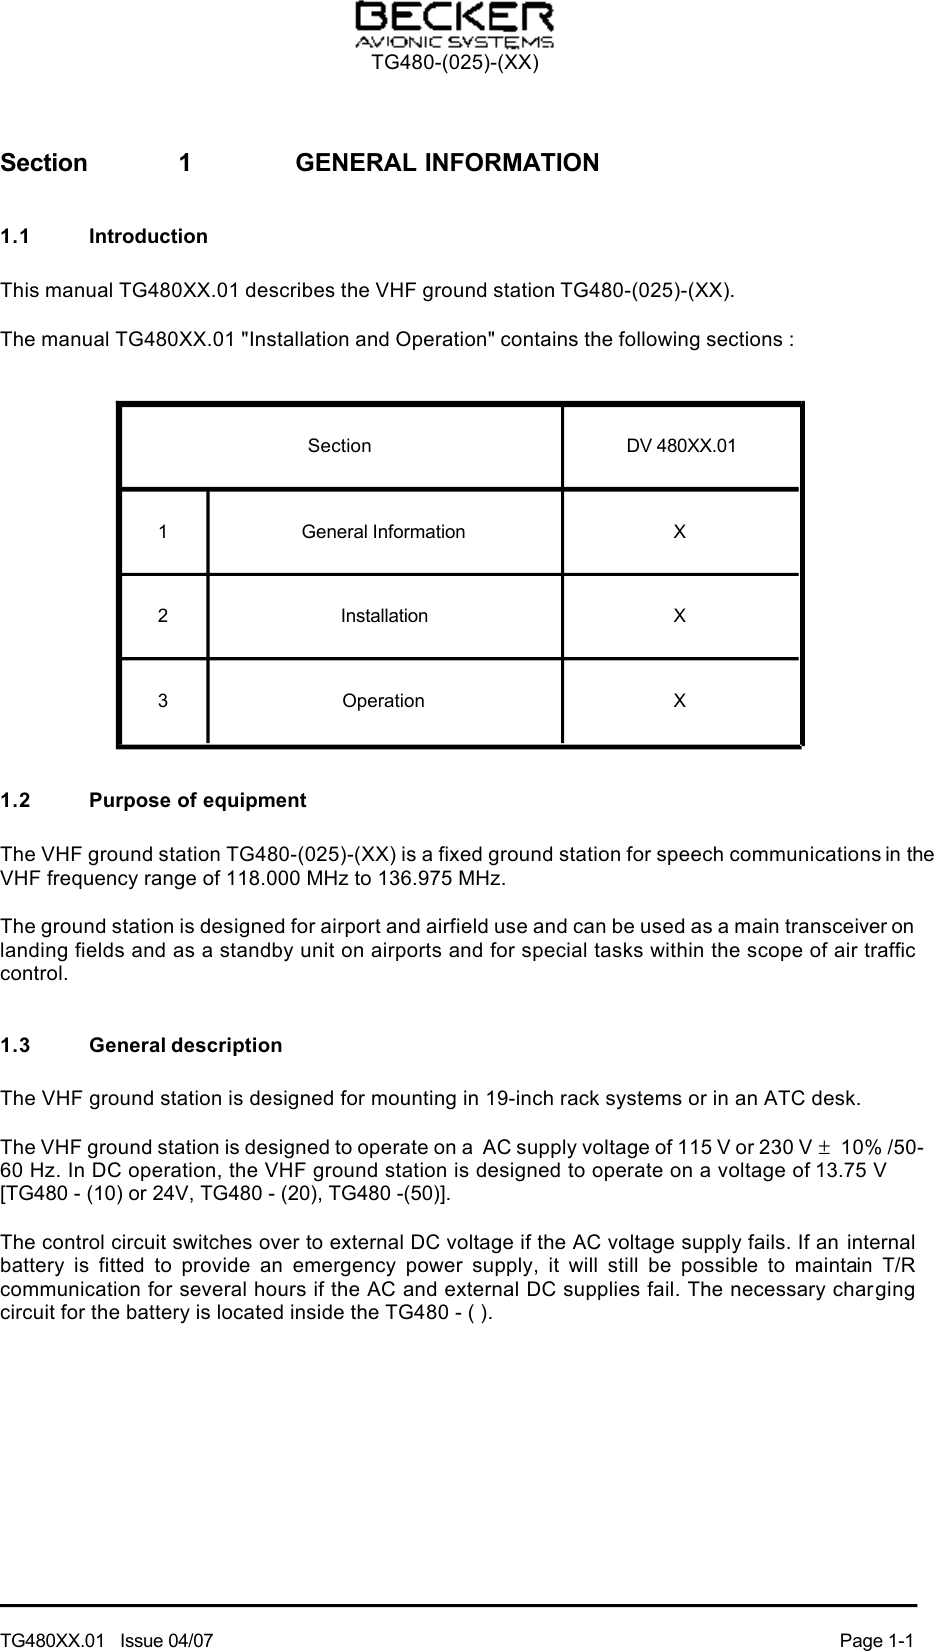 Section  1  GENERAL INFORMATION1.1  IntroductionThis manual TG480XX.01 describes the VHF ground station TG480-(025)-(XX).The manual TG480XX.01 &quot;Installation and Operation&quot; contains the following sections :Section  DV 480XX.011  General Information  X2  Installation  X3  Operation  X1.2  Purpose of equipmentThe VHF ground station TG480-(025)-(XX) is a fixed ground station for speech communications in the VHF frequency range of 118.000 MHz to 136.975 MHz.The ground station is designed for airport and airfield use and can be used as a main transceiver on landing fields and as a standby unit on airports and for special tasks within the scope of air traffic control.1.3  General descriptionThe VHF ground station is designed for mounting in 19-inch rack systems or in an ATC desk.The VHF ground station is designed to operate on a  AC supply voltage of 115 V or 230 V ± 10% /50-60 Hz. In DC operation, the VHF ground station is designed to operate on a voltage of 13.75 V     [TG480 - (10) or 24V, TG480 - (20), TG480 -(50)].The control circuit switches over to external DC voltage if the AC voltage supply fails. If an internal battery  is  fitted  to  provide  an  emergency  power  supply,  it  will  still  be  possible  to  maintain  T/R communication for several hours if the AC and external DC supplies fail. The necessary charging circuit for the battery is located inside the TG480 - ( ). TG480-(025)-(XX)TG480XX.01   Issue 04/07  Page 1-1